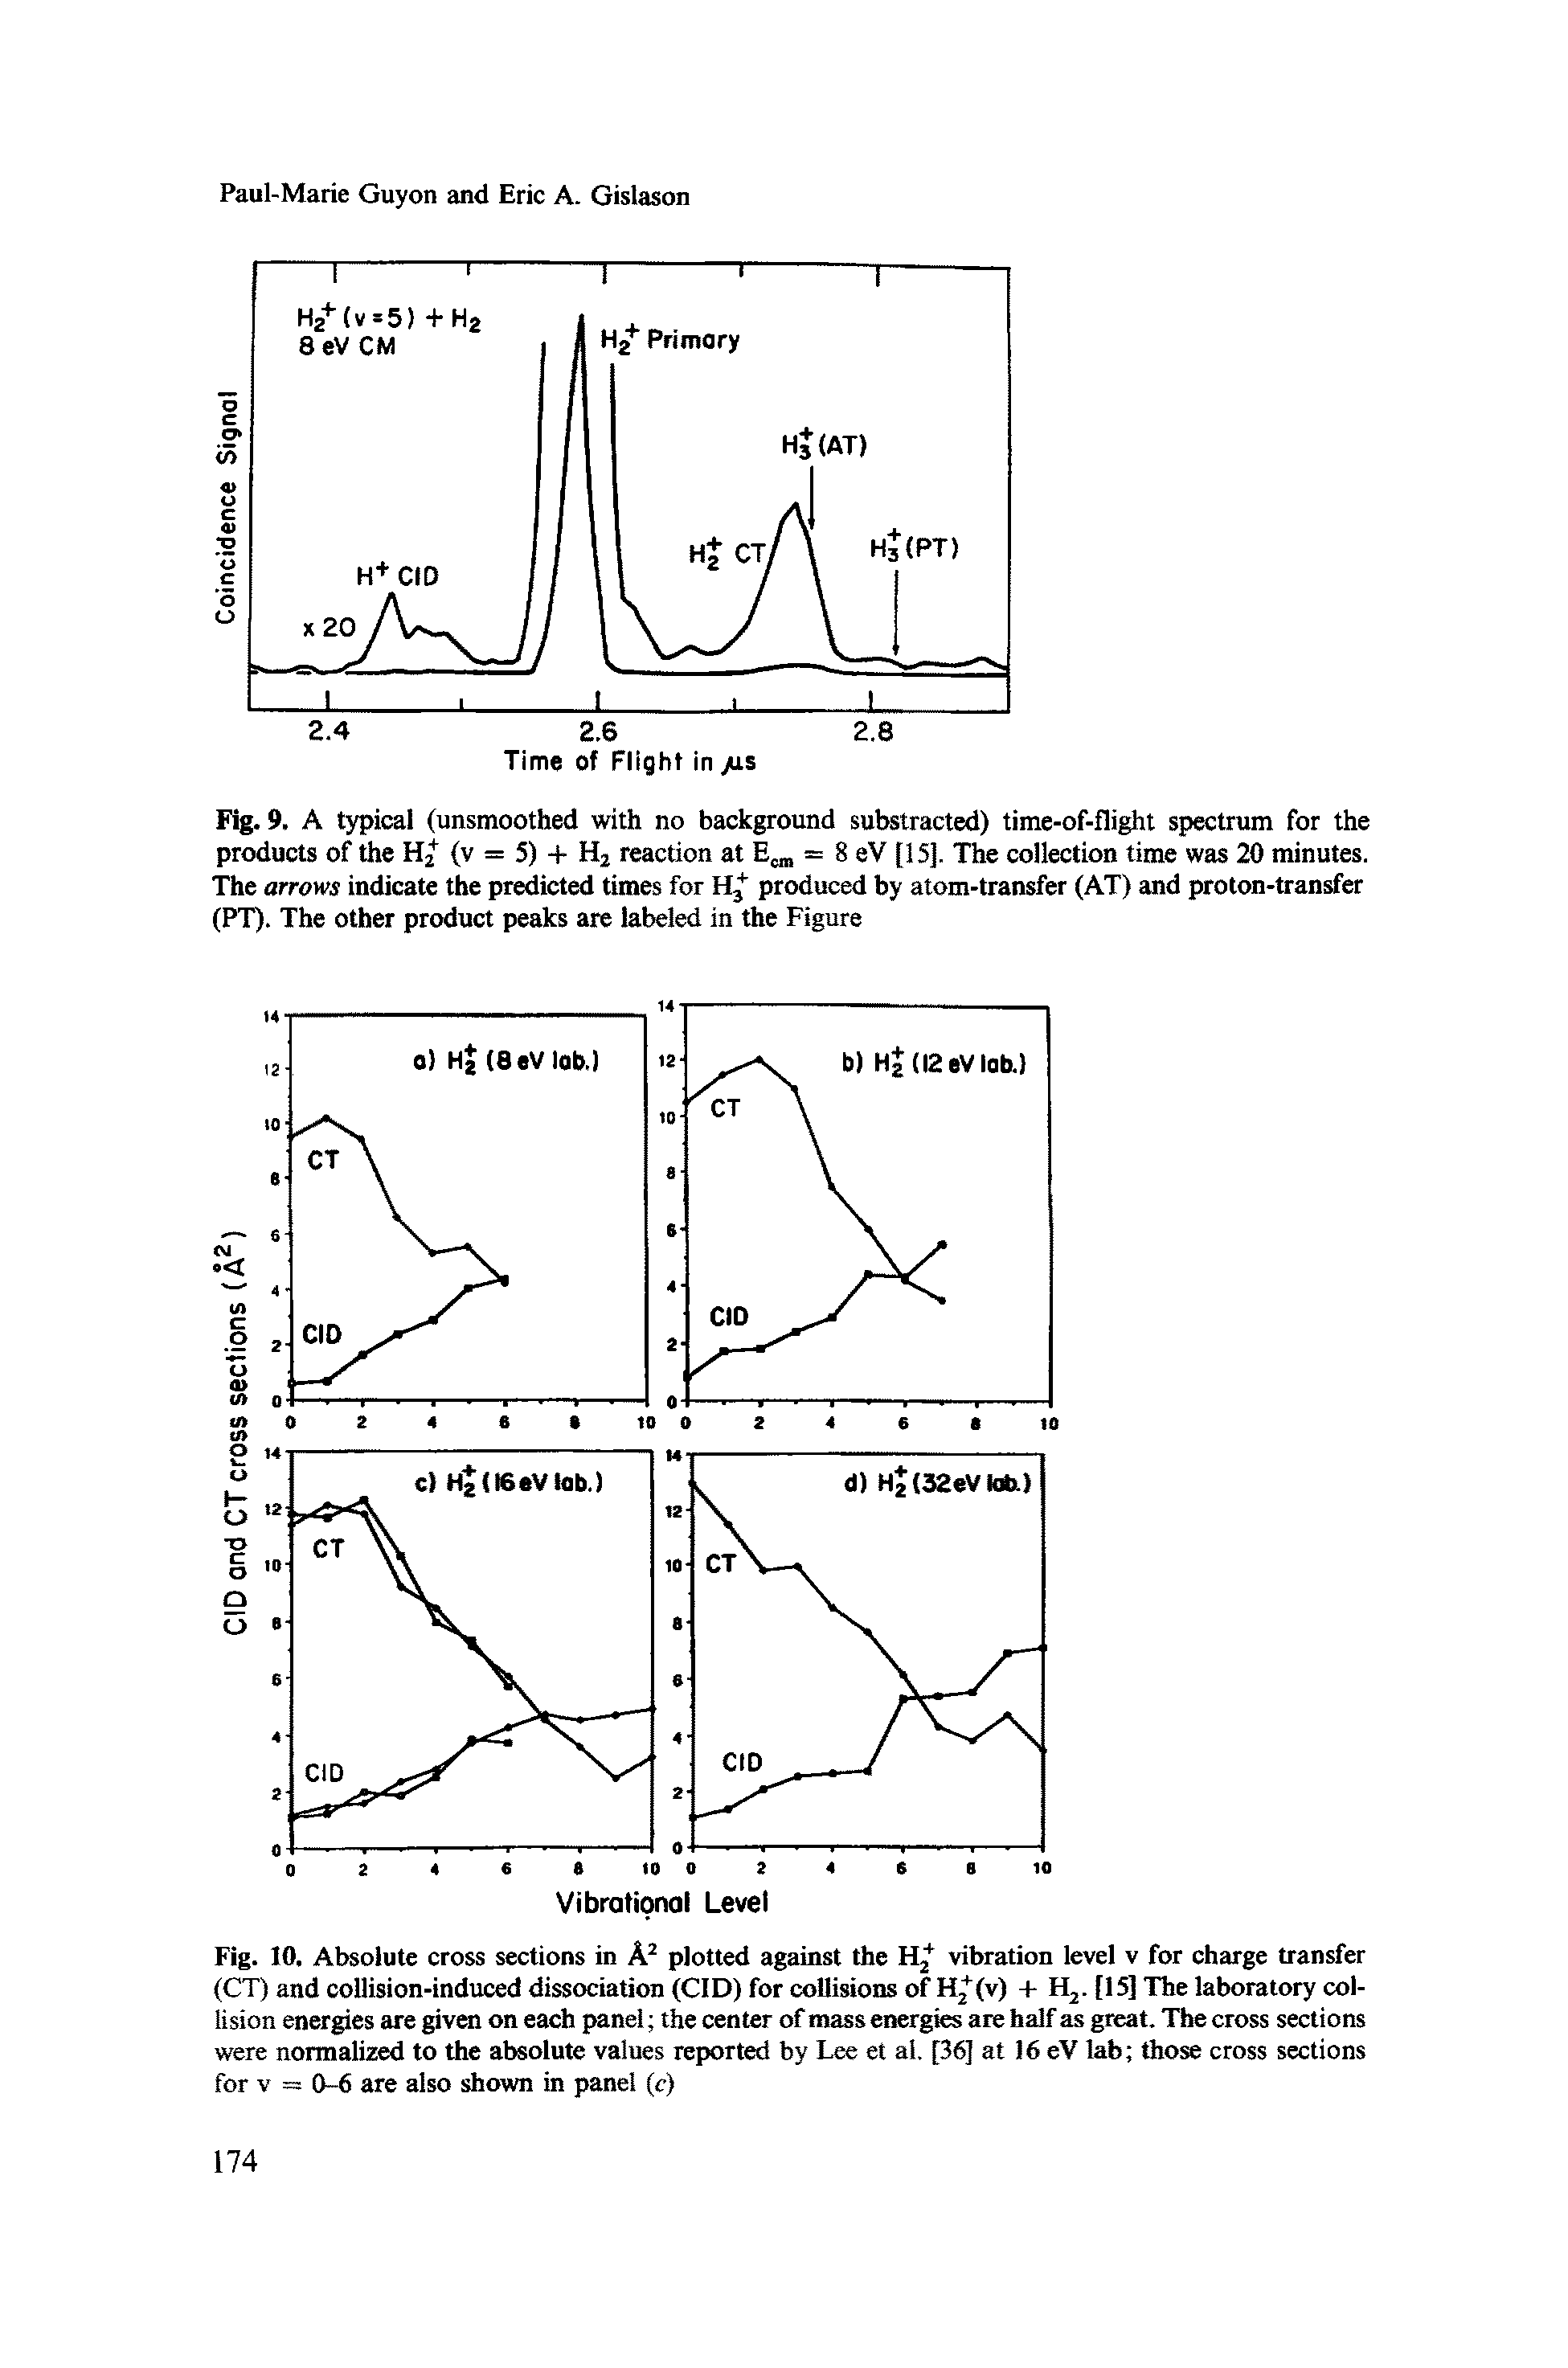 Fig. 9. A typical (unsmoothed with no background substracted) time-of-flight spectrum for the products of the H2+ (v = 5) + H2 reaction at Ecm = 8 eV [15]. The collection time was 20 minutes. The arrows indicate the predicted times for H3+ produced by atom-transfer (AT) and proton-transfer (PT). The other product peaks are labeled in the Figure...